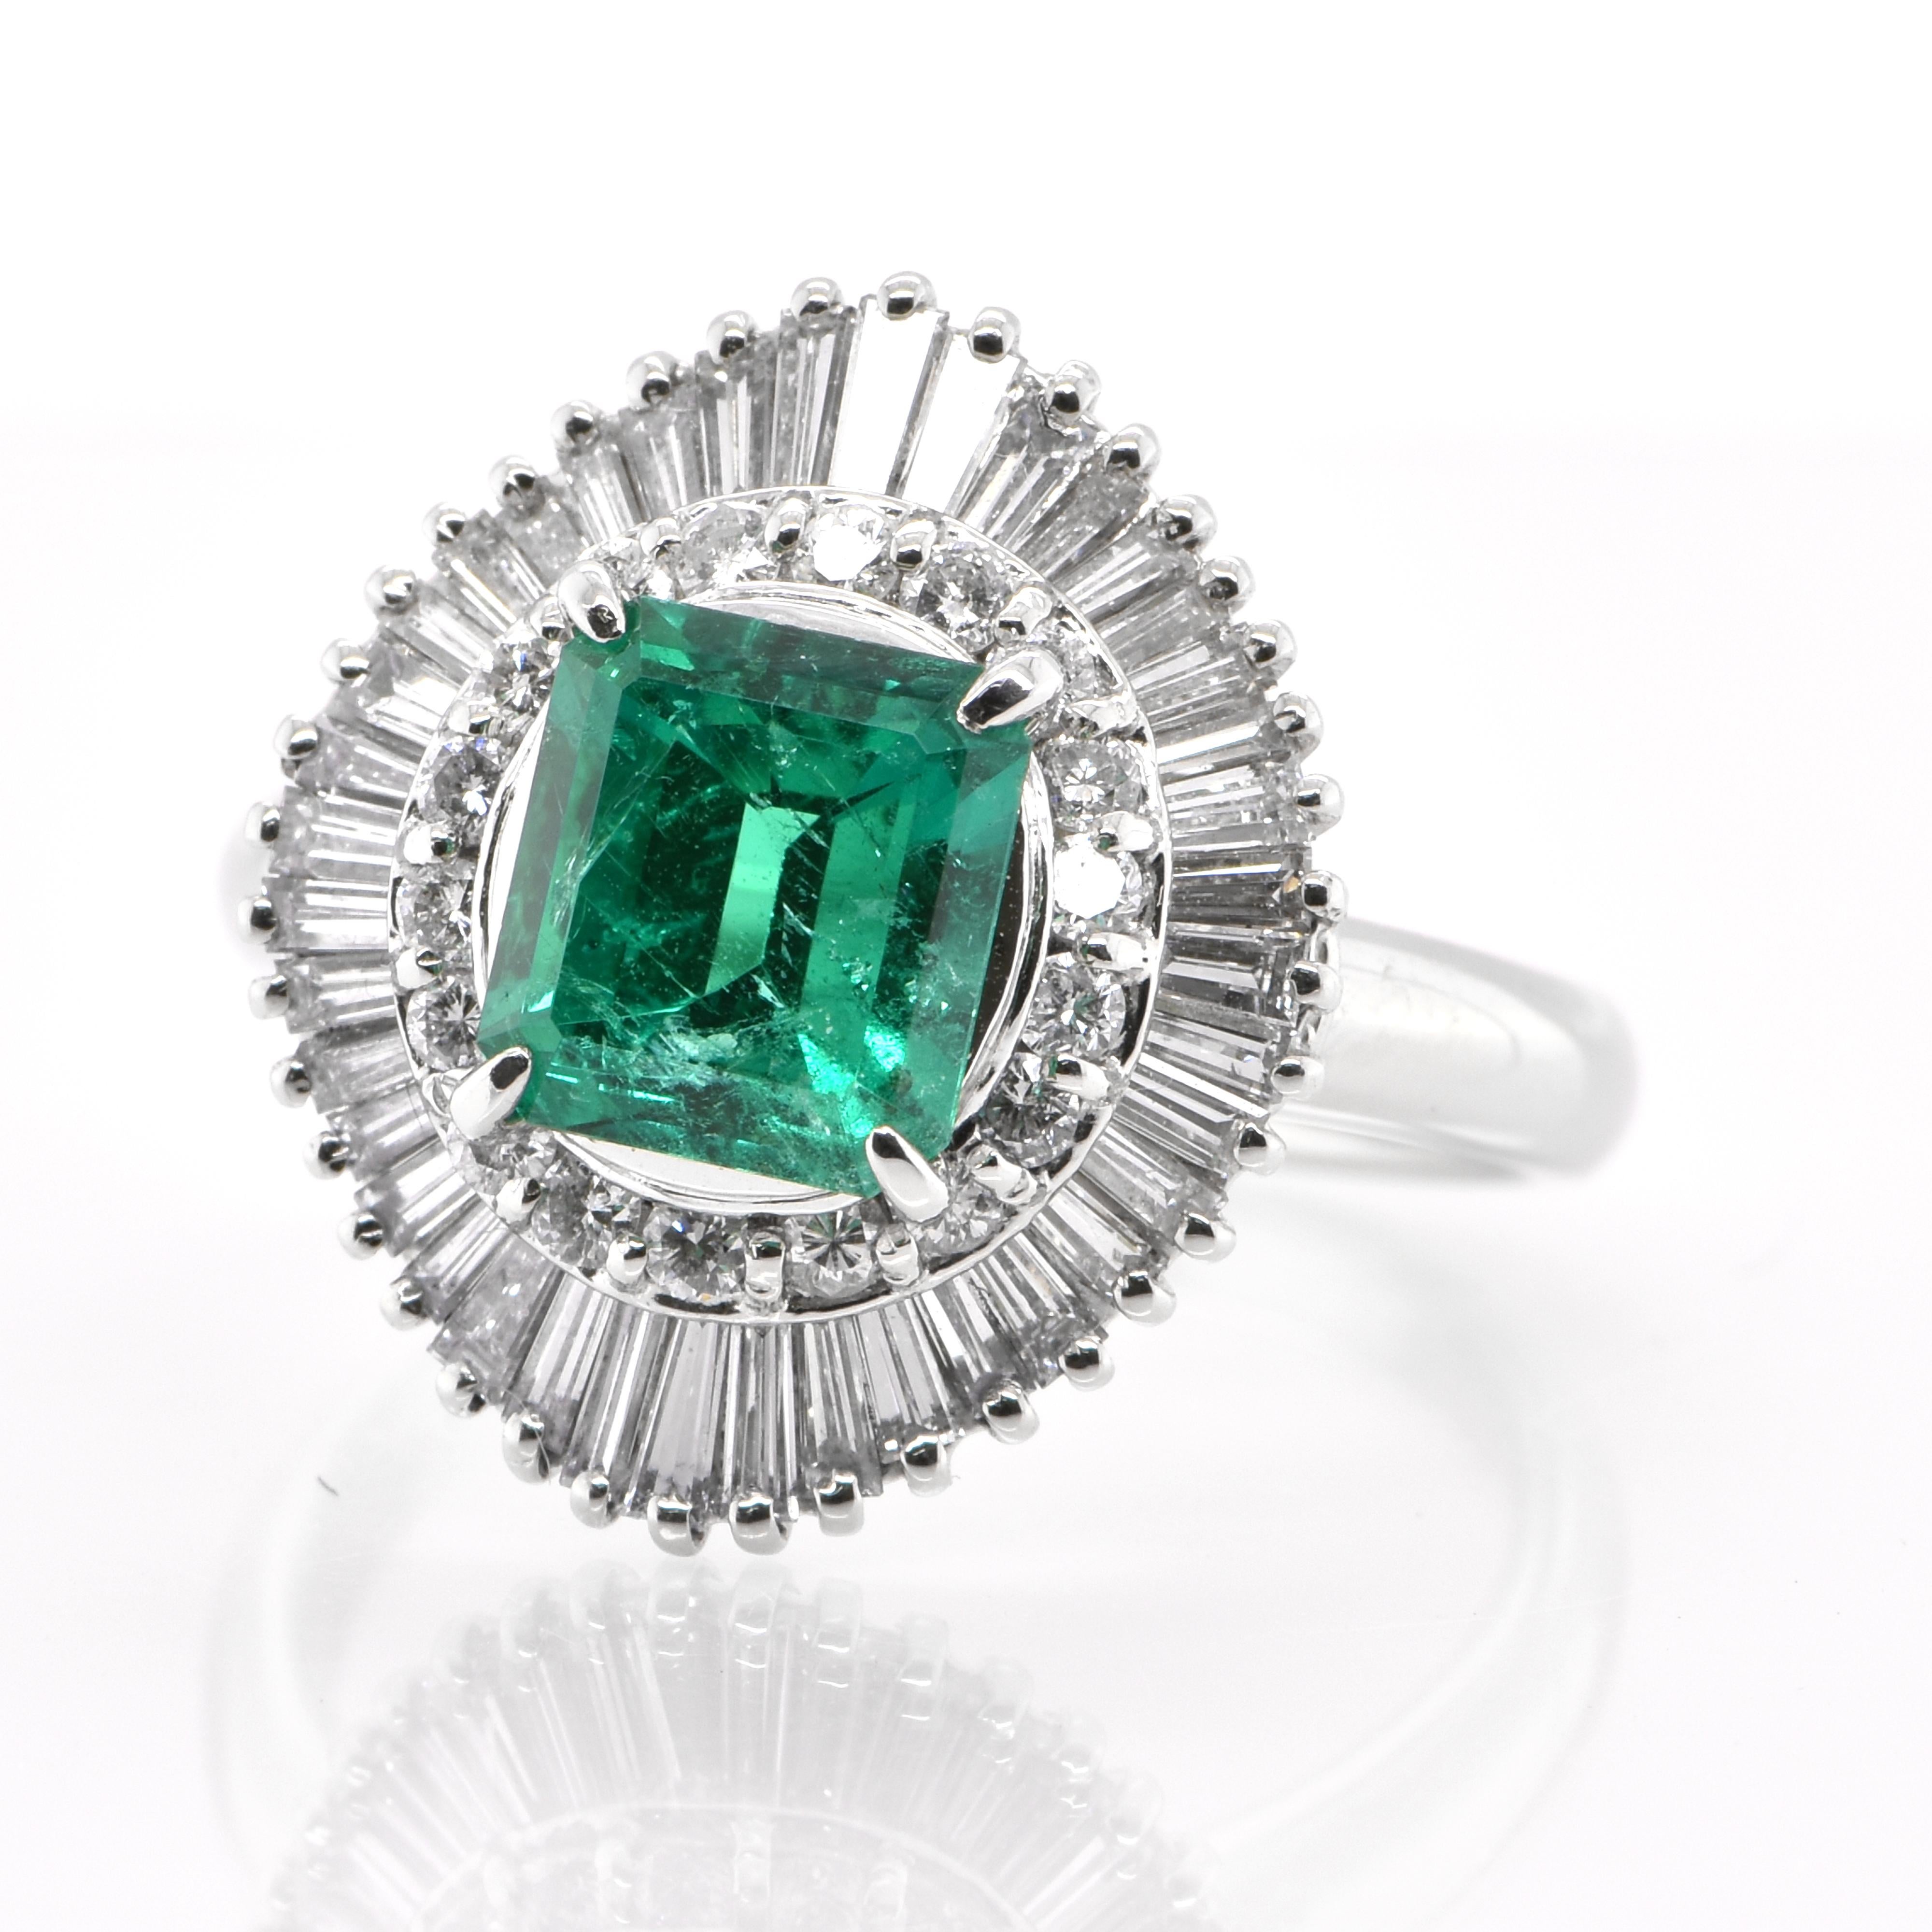 A stunning Ballerina Ring featuring a 1.66 Carat Natural Vivid Green Emerald and 0.84 Carats of Diamond Accents set in Platinum. People have admired emerald’s green for thousands of years. Emeralds have always been associated with the lushest